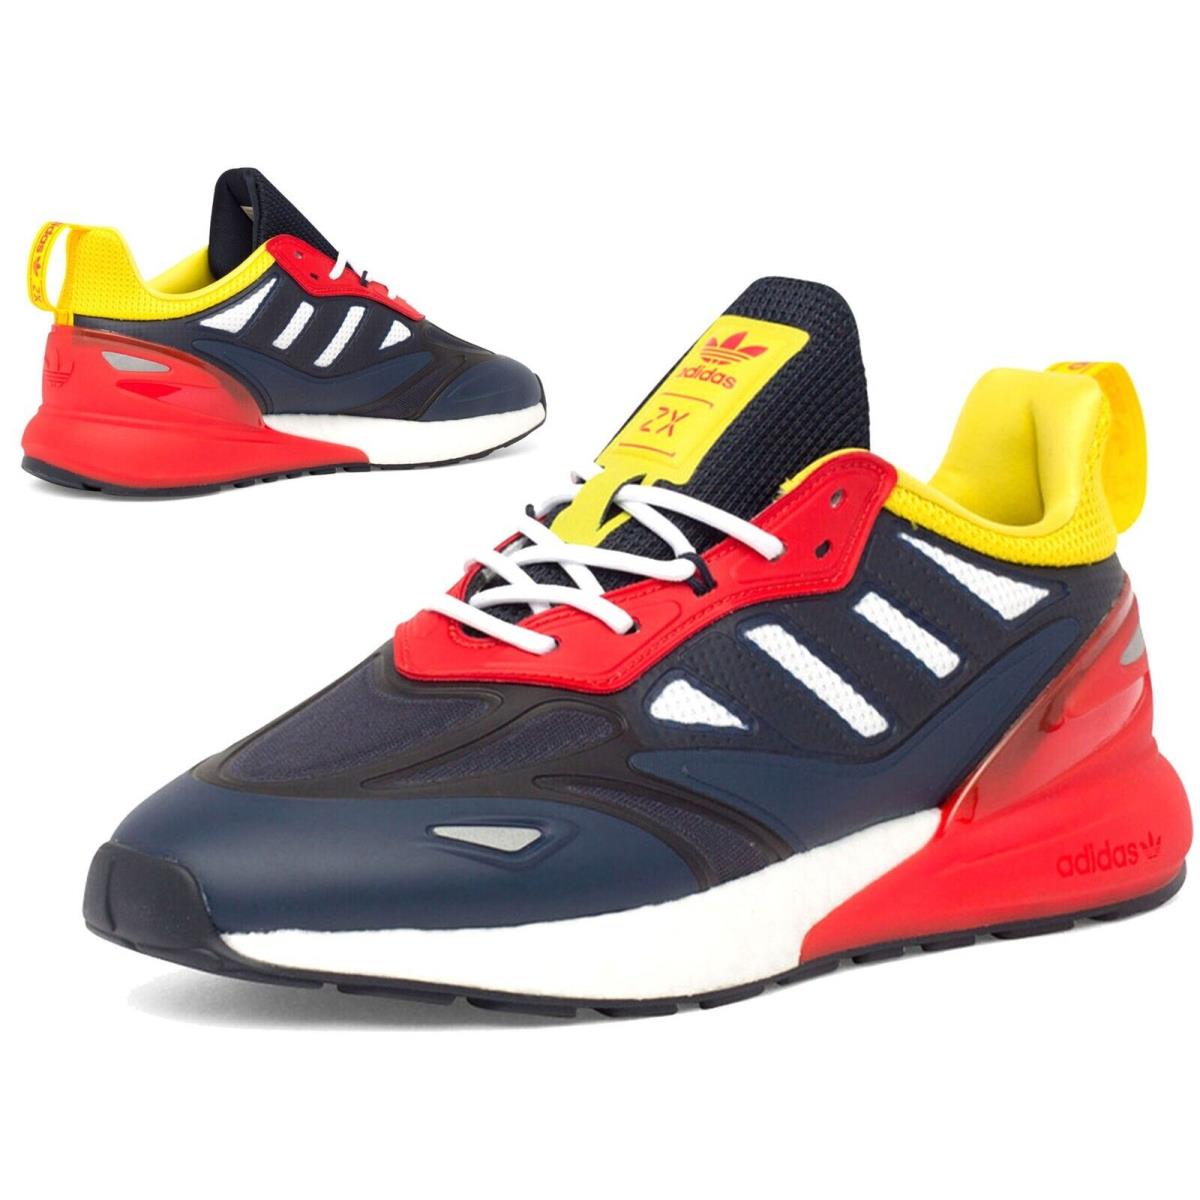 Adidas ZX 2K Boost Mens Athletic Sneaker Casual Shoes Red Yellow All Sizes